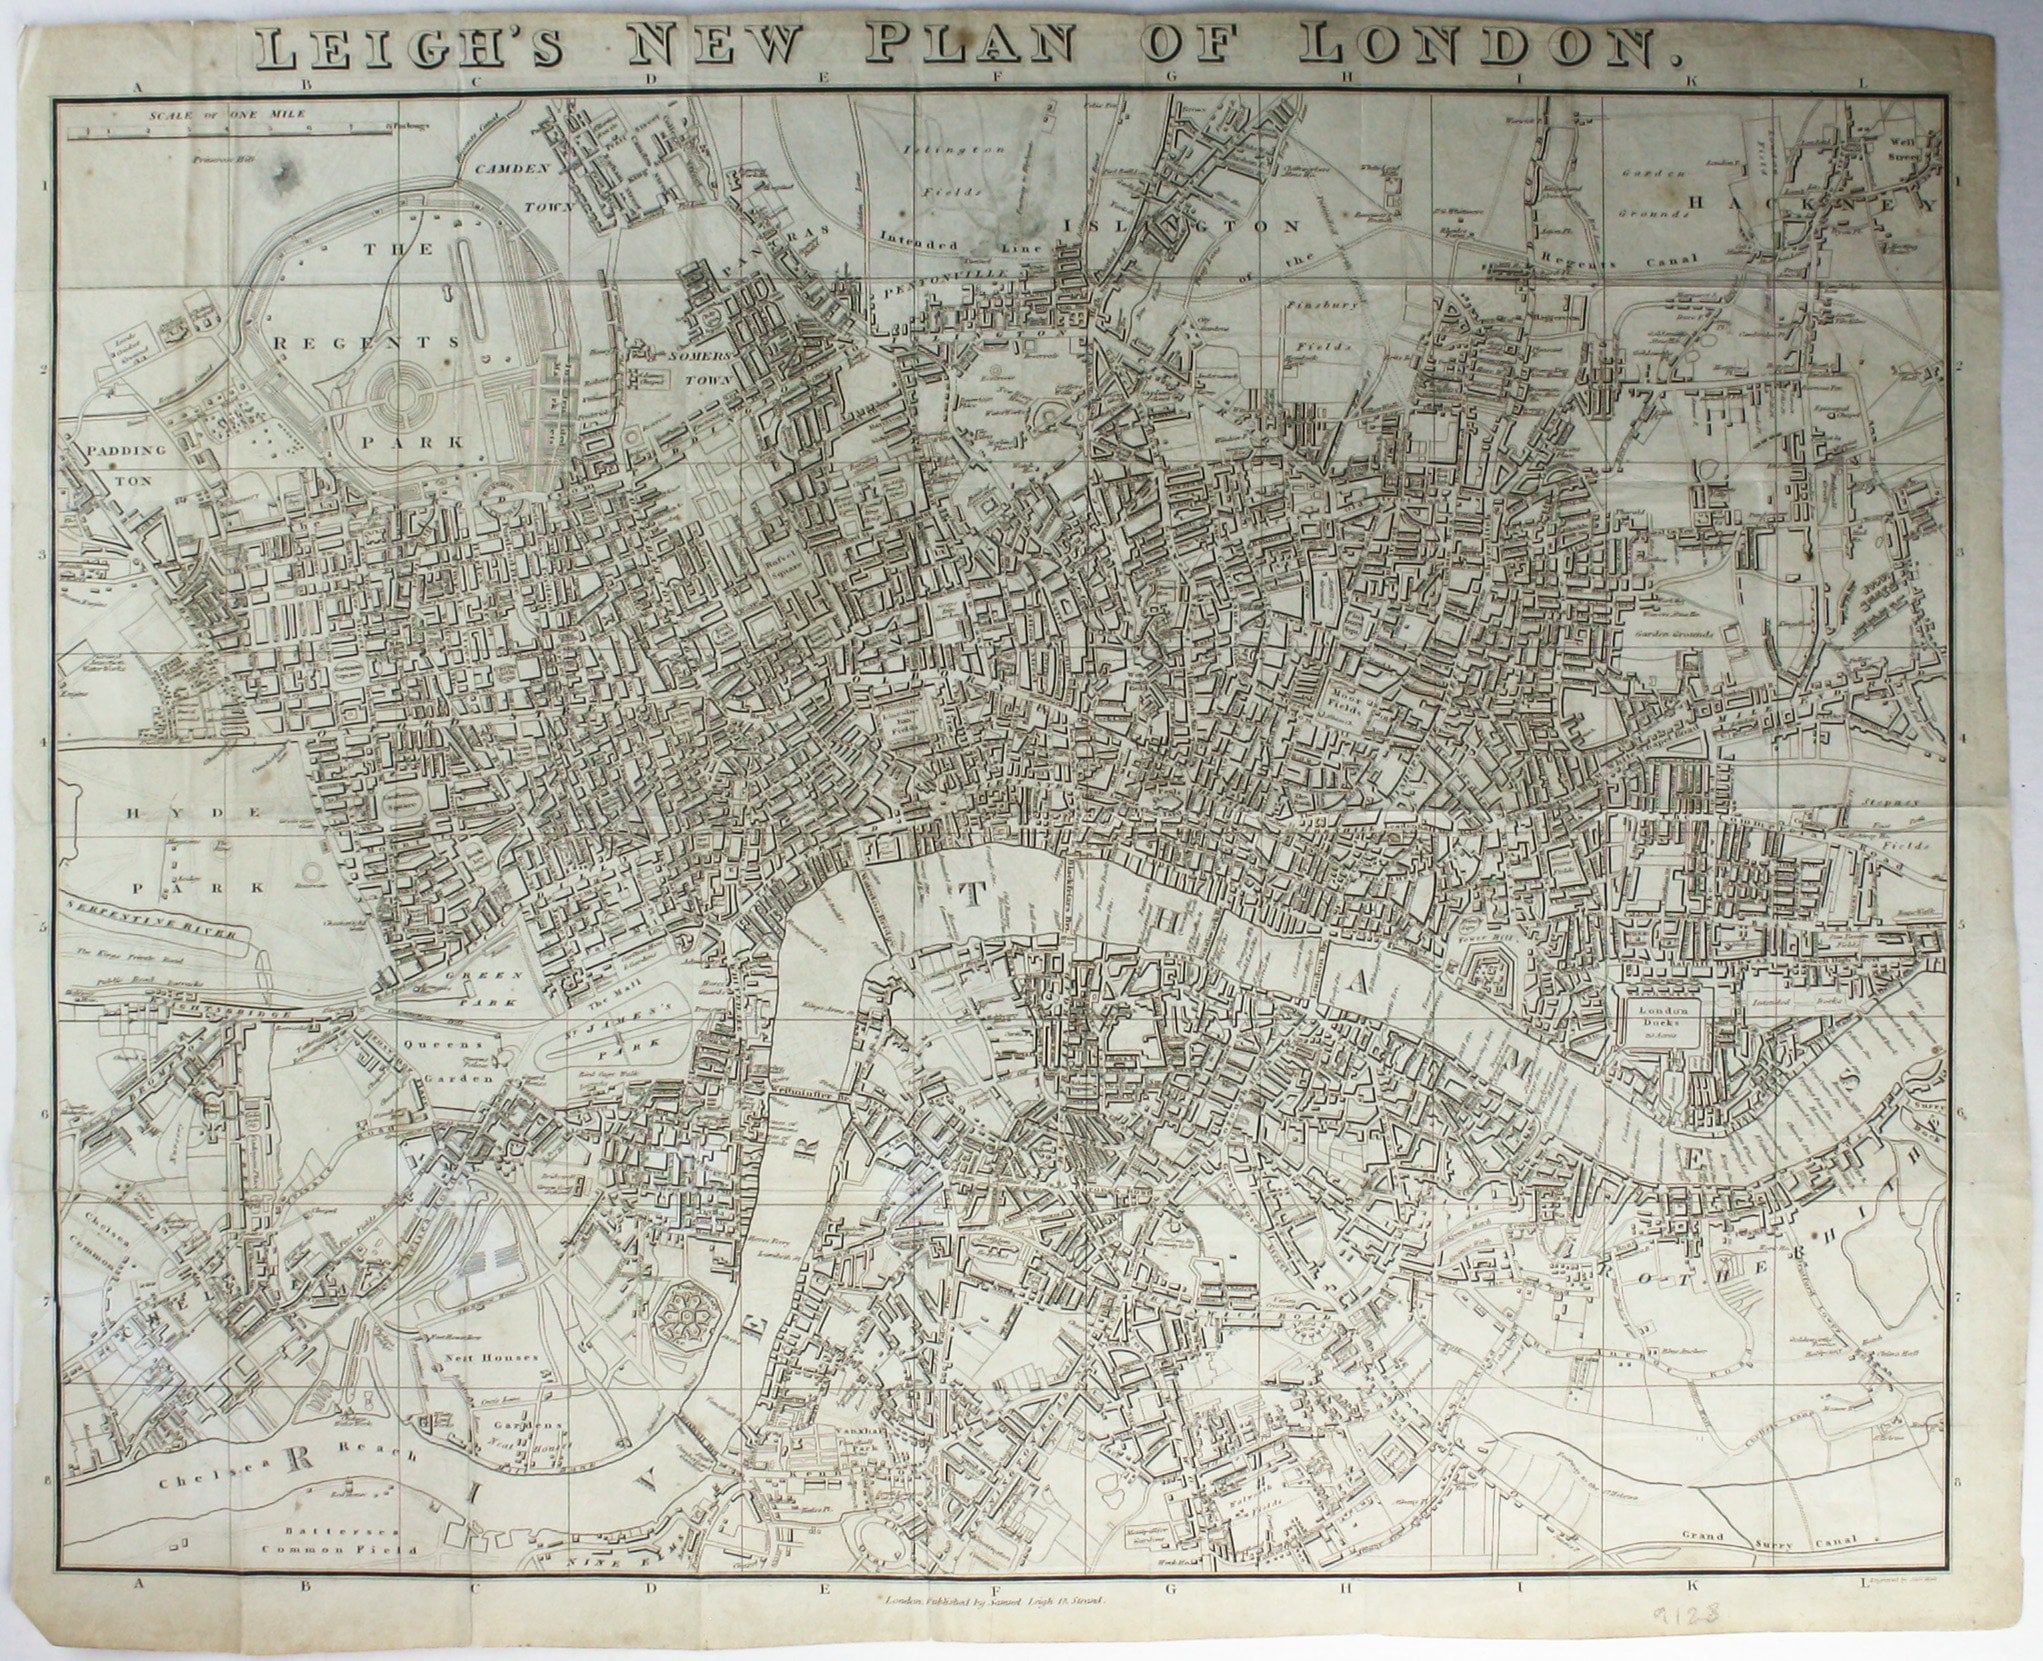 Leigh’s Map of London